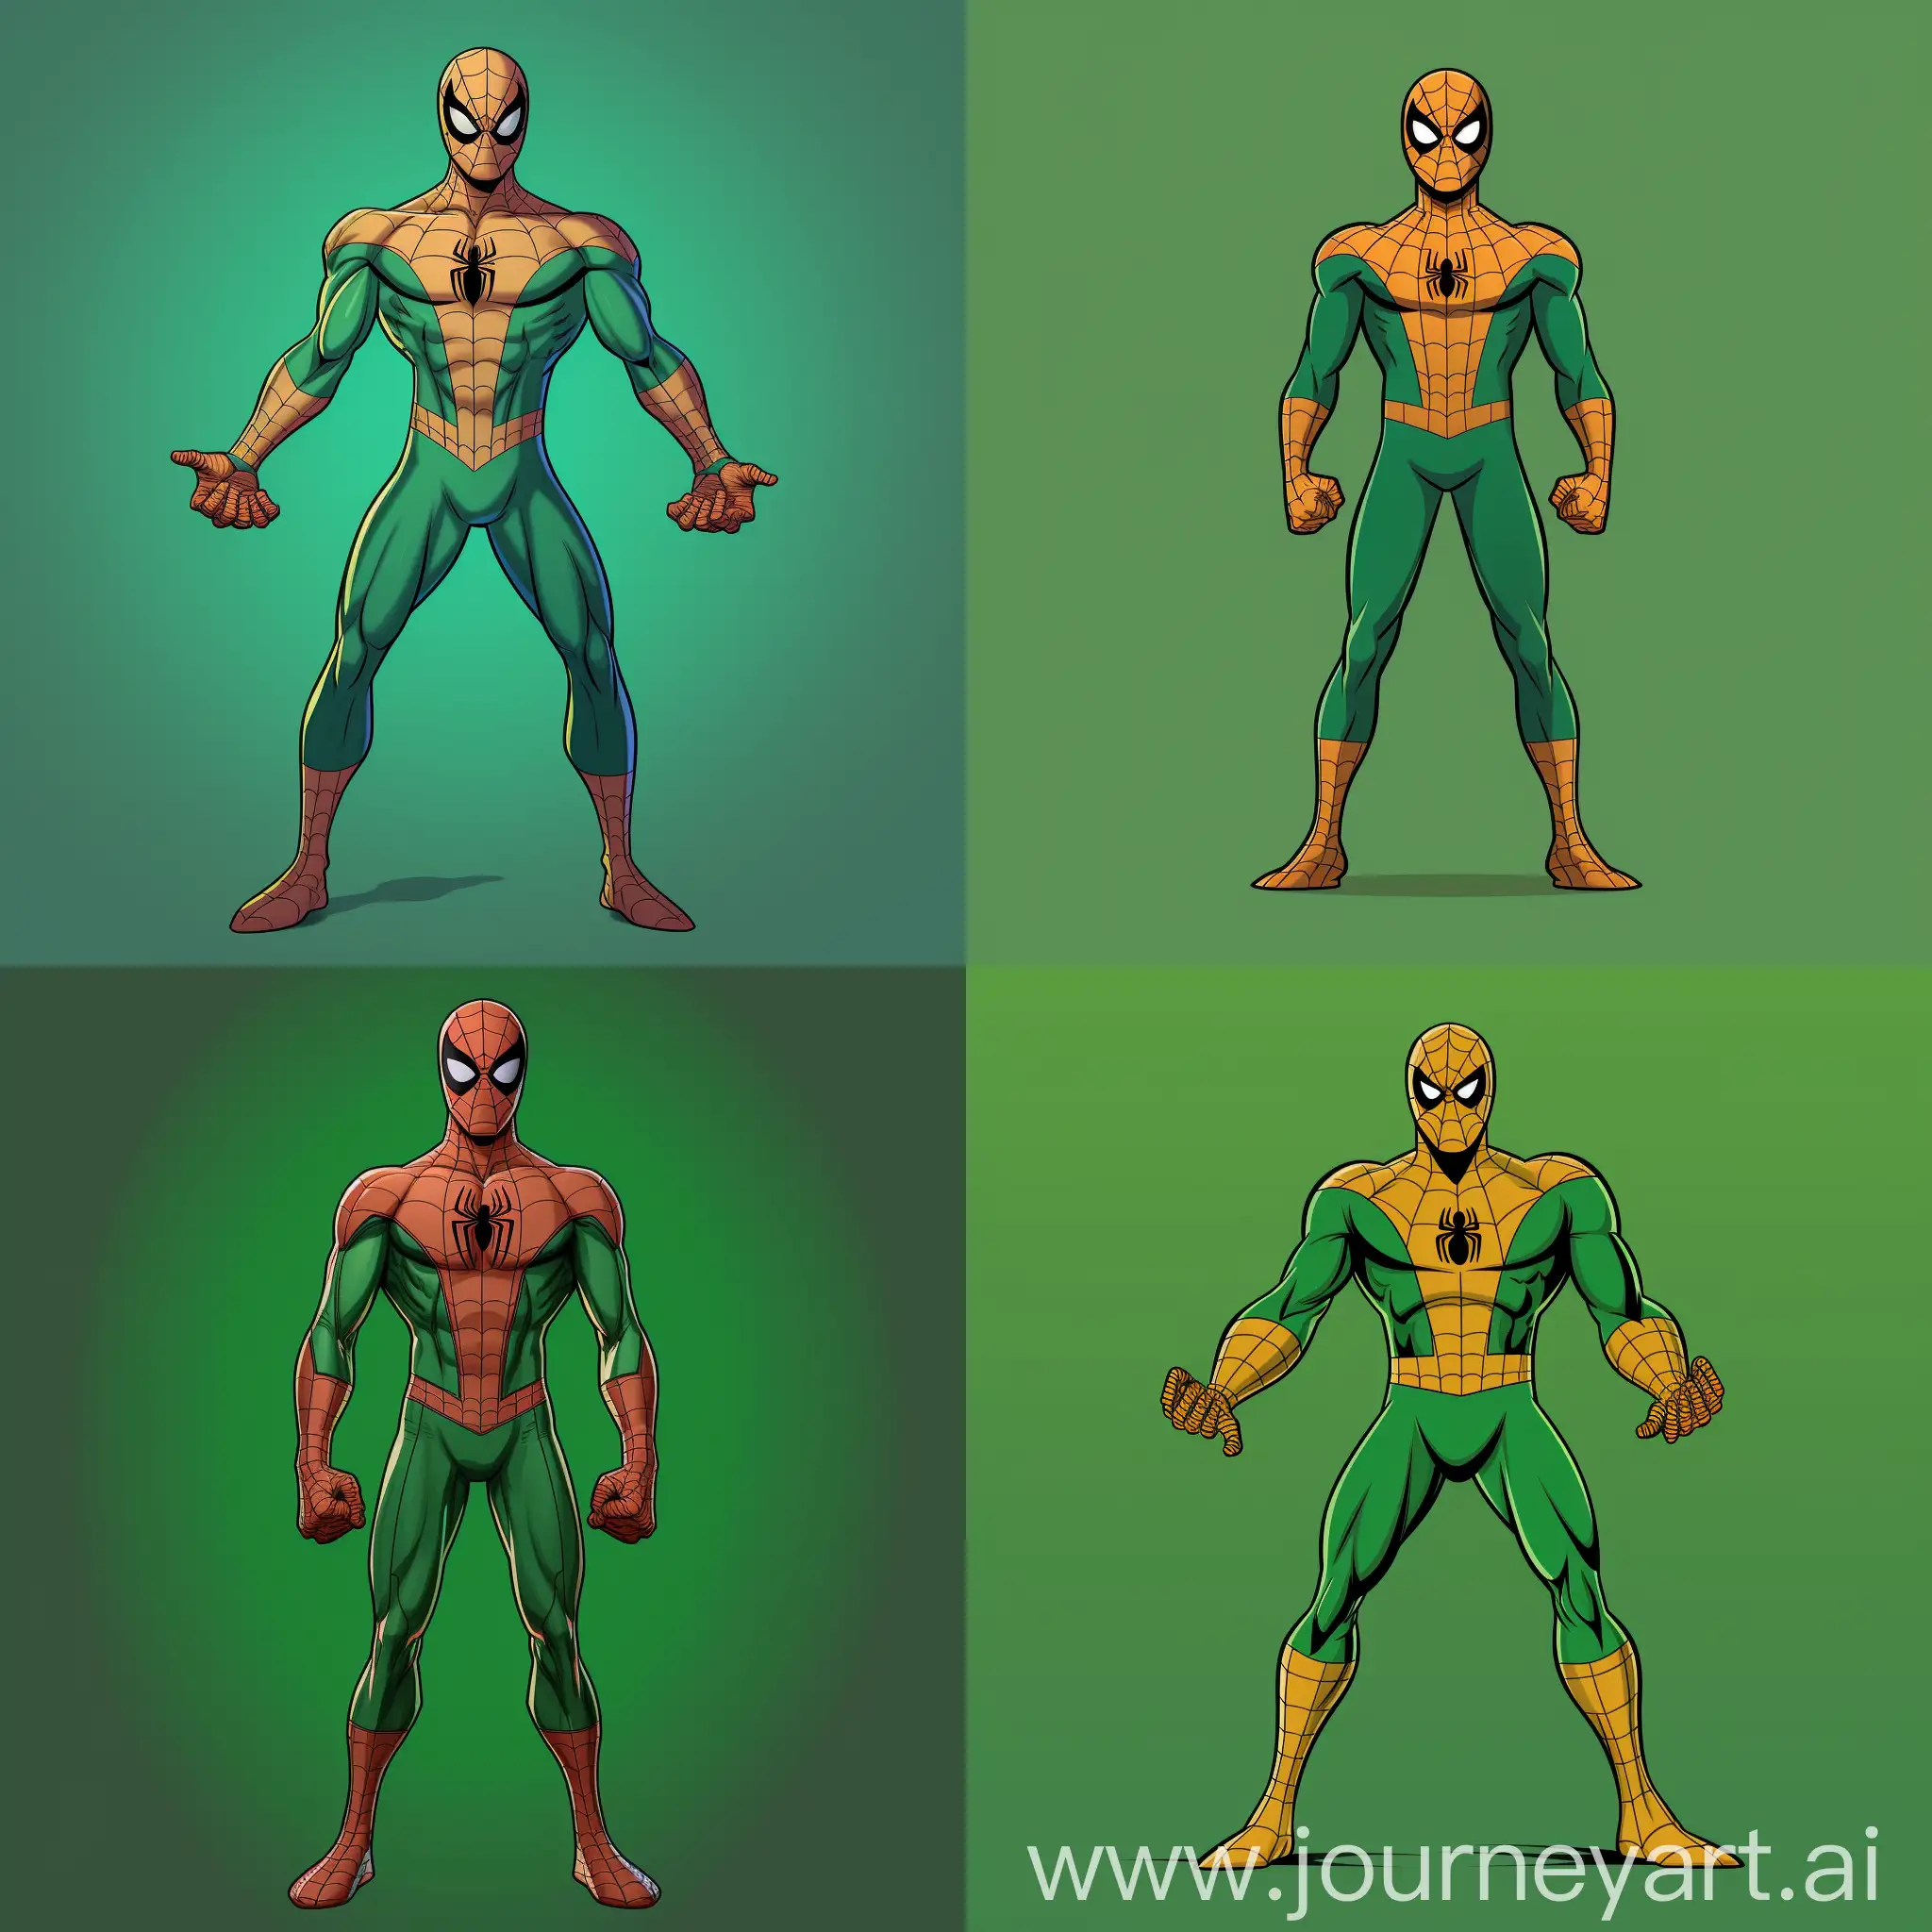 Front view of Spider-Man as a character in Scooby-Doo, standing full length with arms and legs open and looking at the camera, on a green background --v 5.2